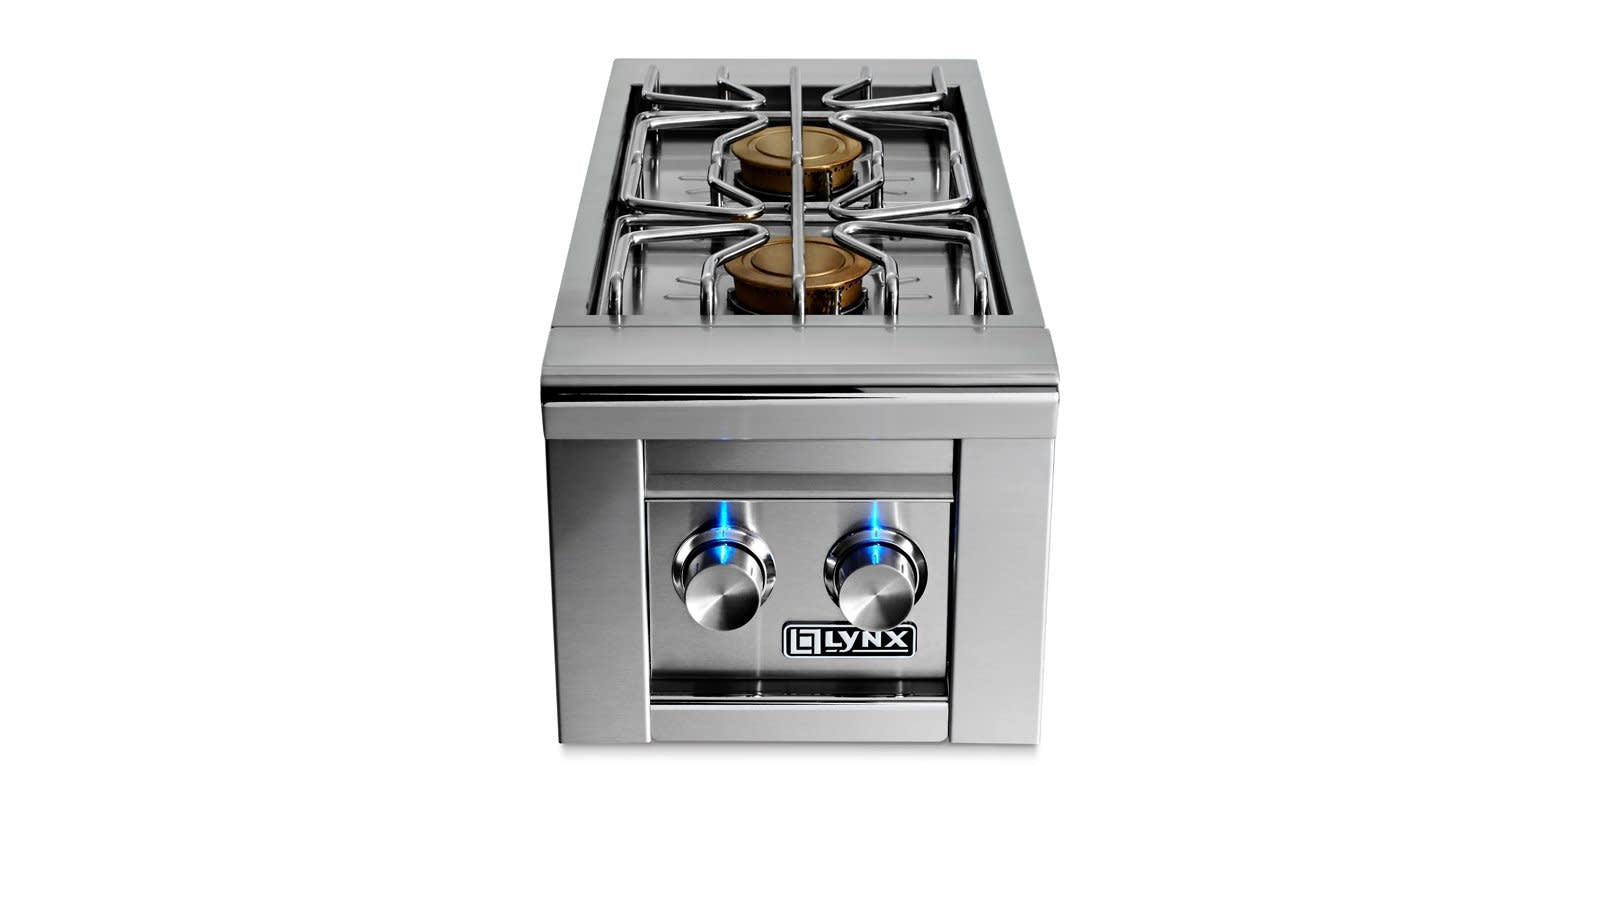 Built-in Double side burners